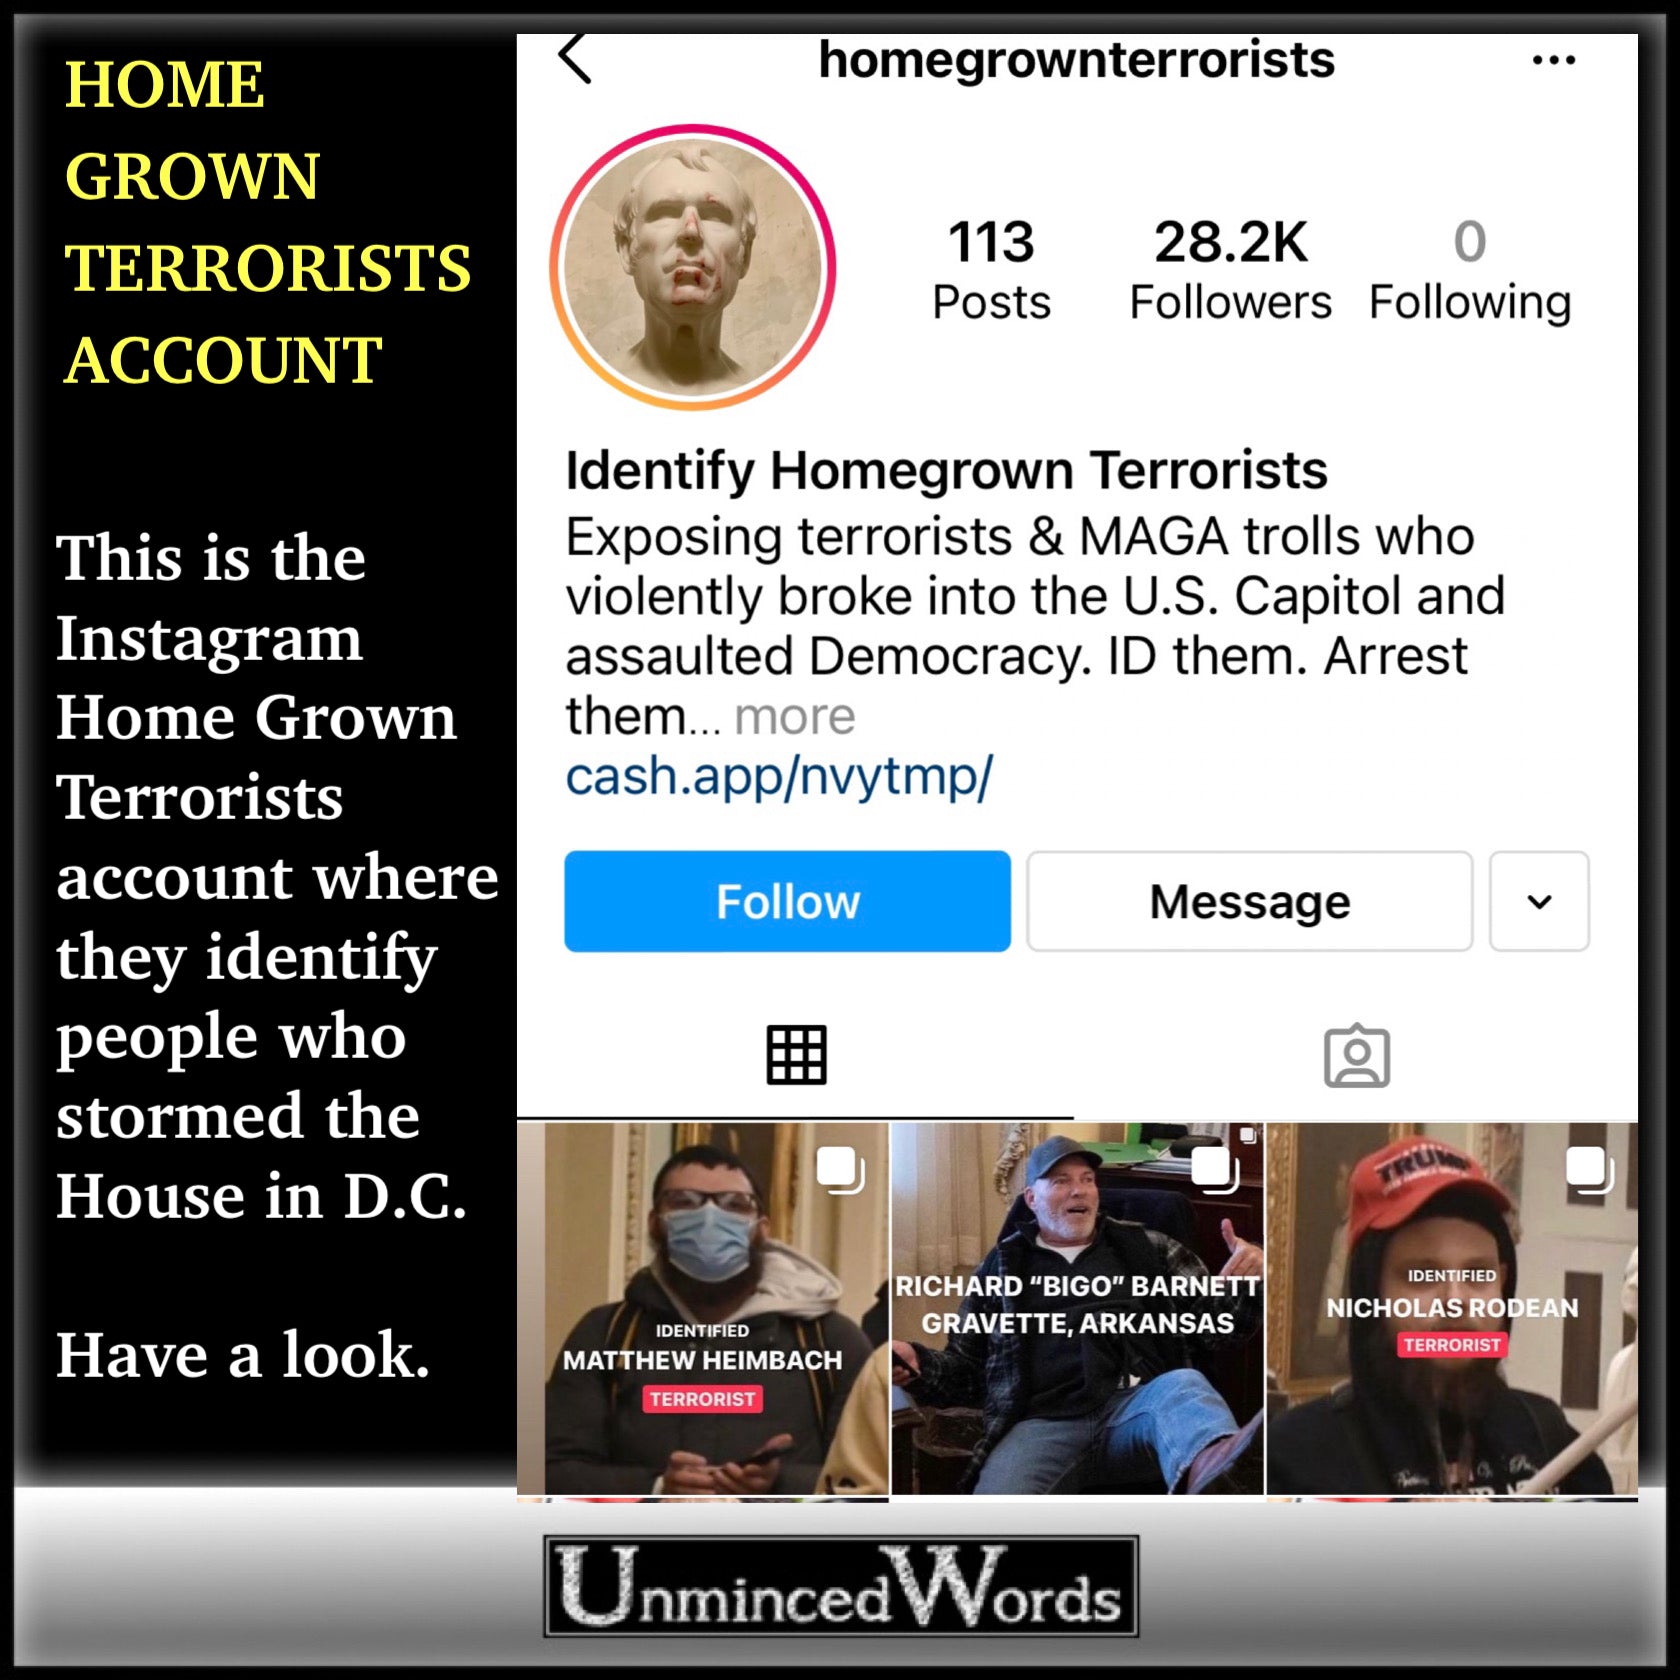 This is the Instagram HOME GROWN TERRORISTS account where they identify people who stormed the House in D.C.